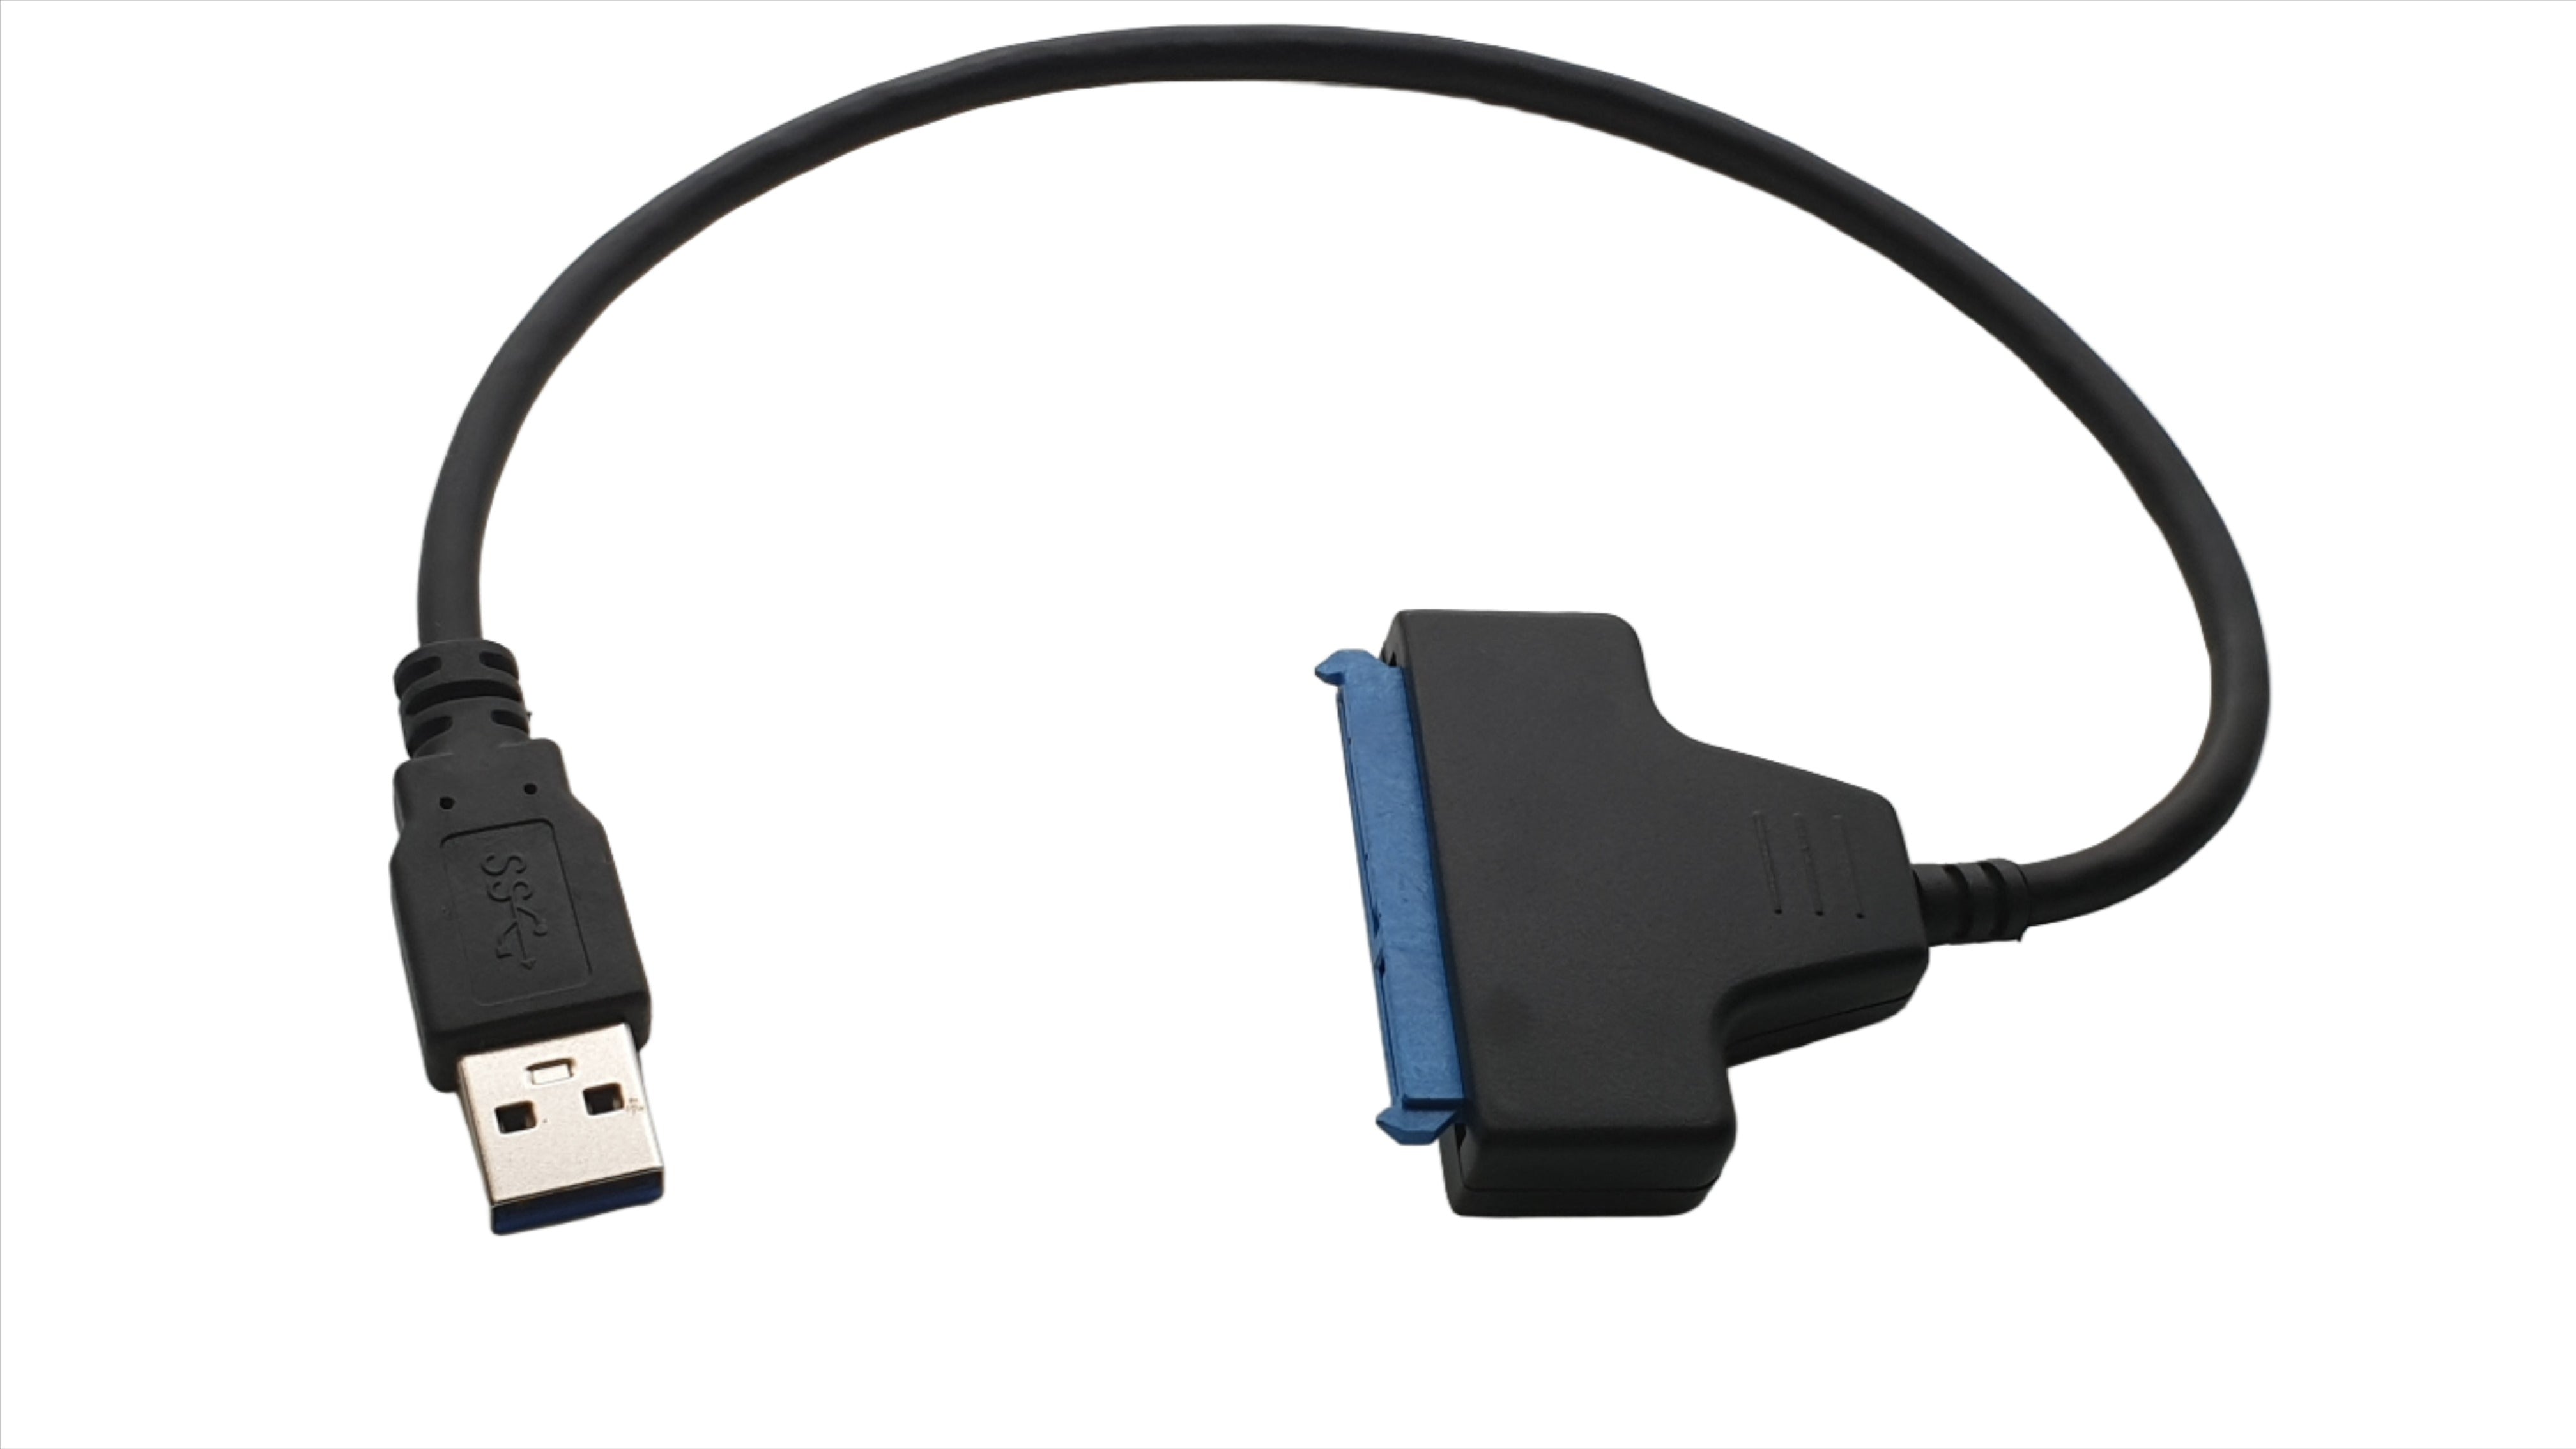 USB-A 3.0 to SATA for 2.5" HDD